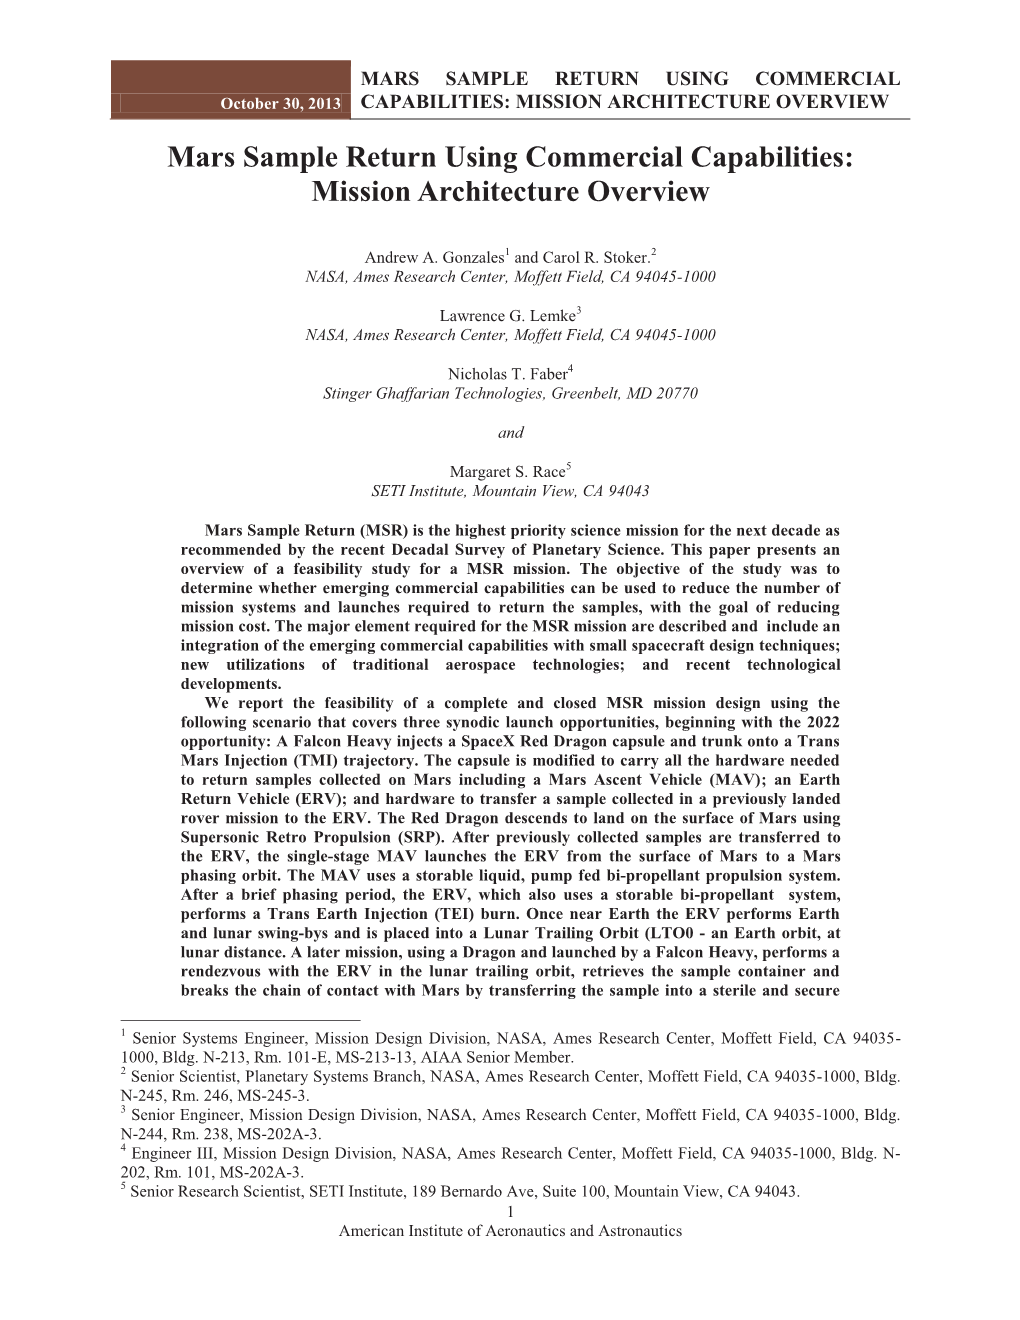 Mars Sample Return Using Commercial Capabilities: Mission Architecture Overview